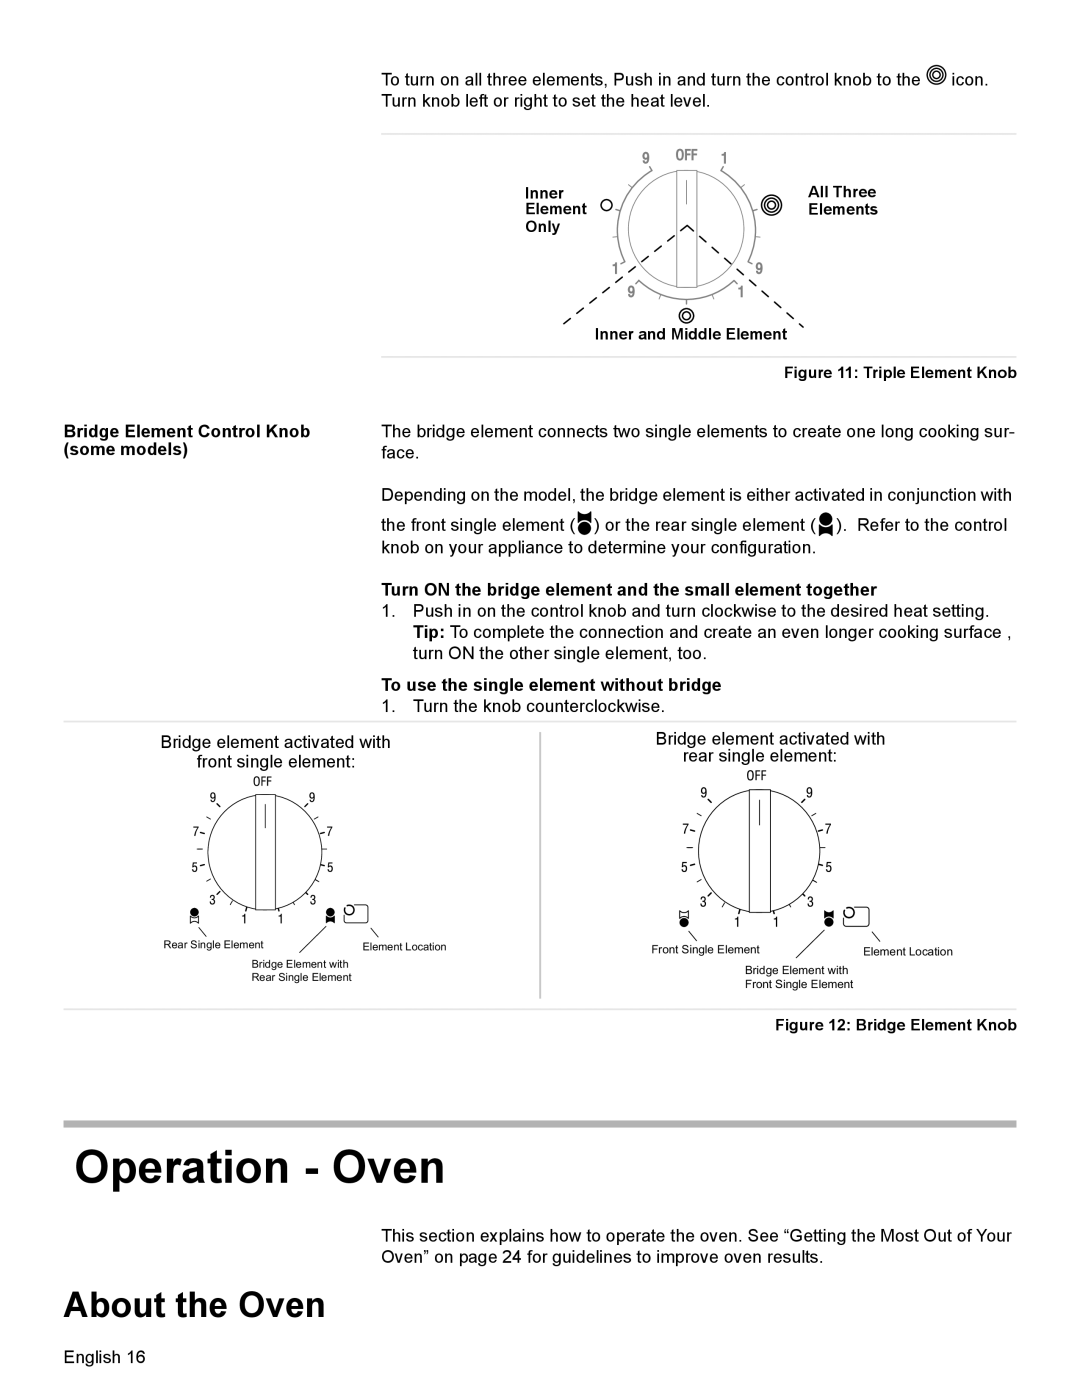 Bosch Appliances HES7052U manual Operation - Oven, About the Oven, Bridge Element Control Knob some models 